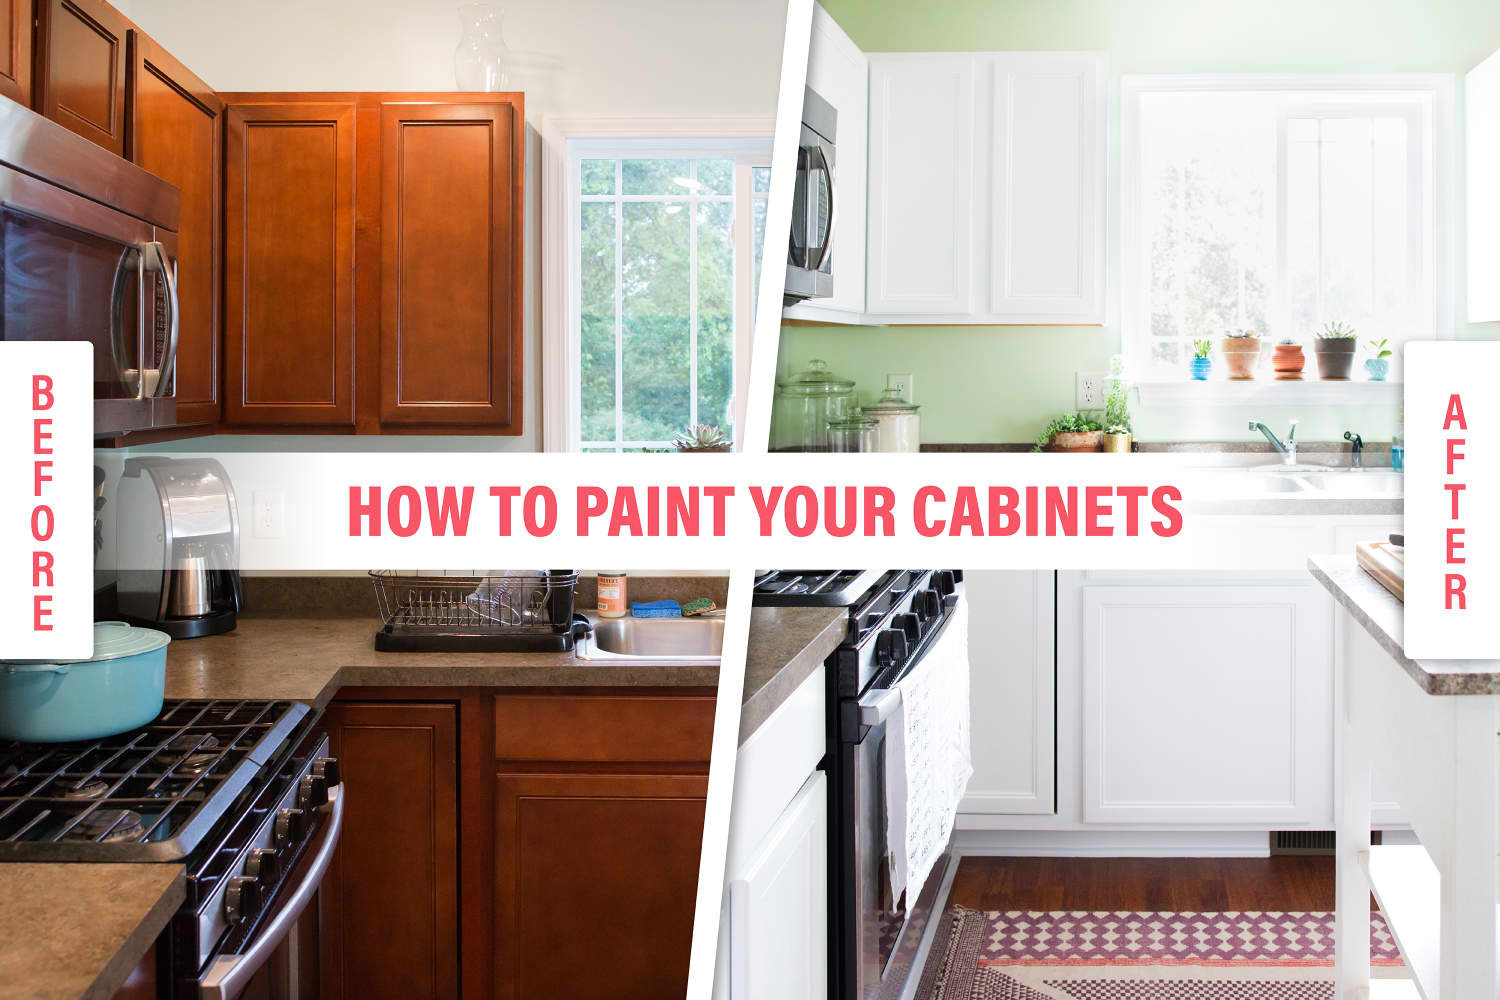 Kitchen Cabinet Paint White
 How To Paint Wood Kitchen Cabinets with White Paint